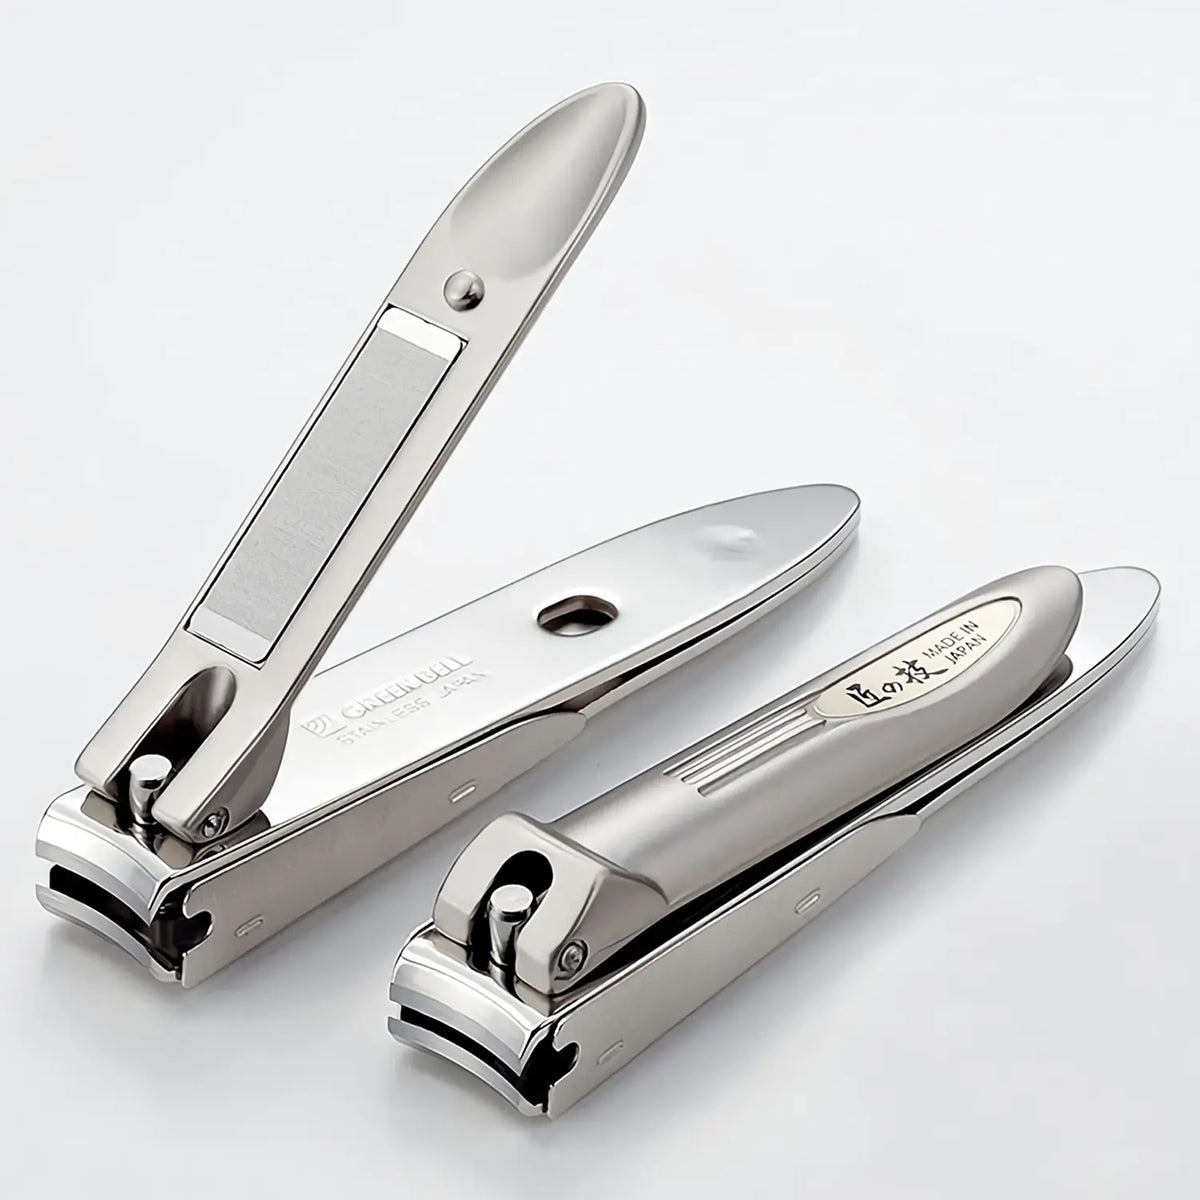 Green Bell Takuminowaza Stainless Steel Curved Blade Nail Clippers with Catcher